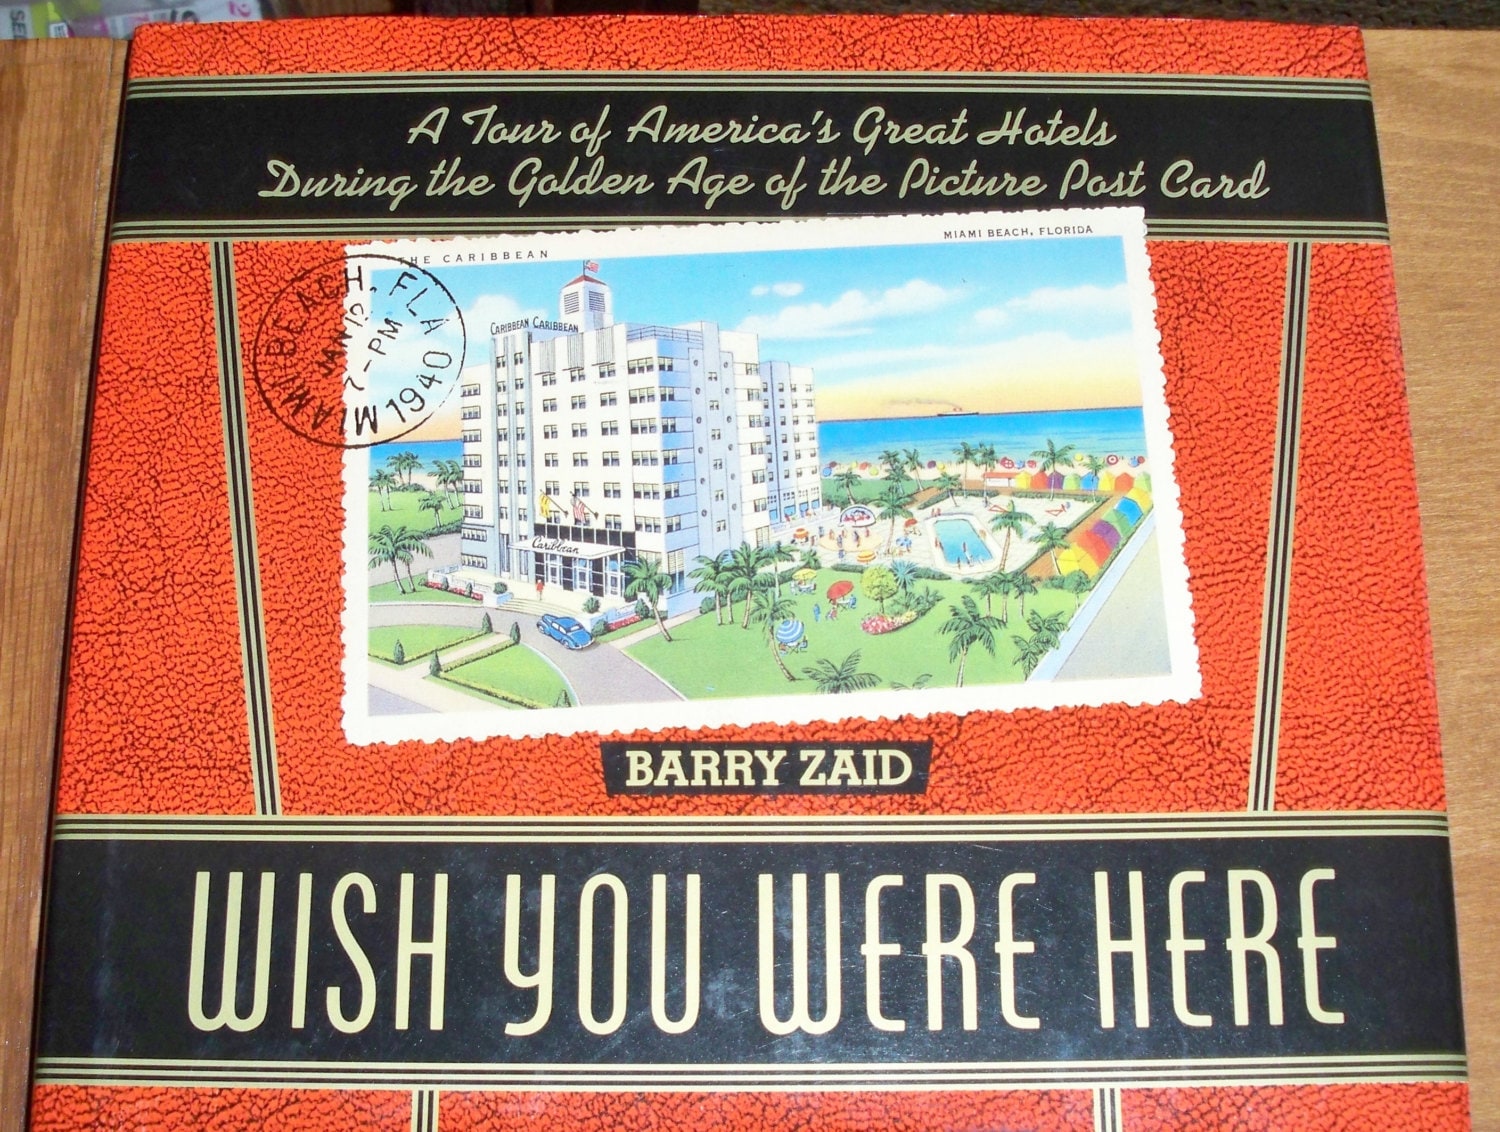 Wish You Were Here by Barry Zaid Hardback Book of Picture